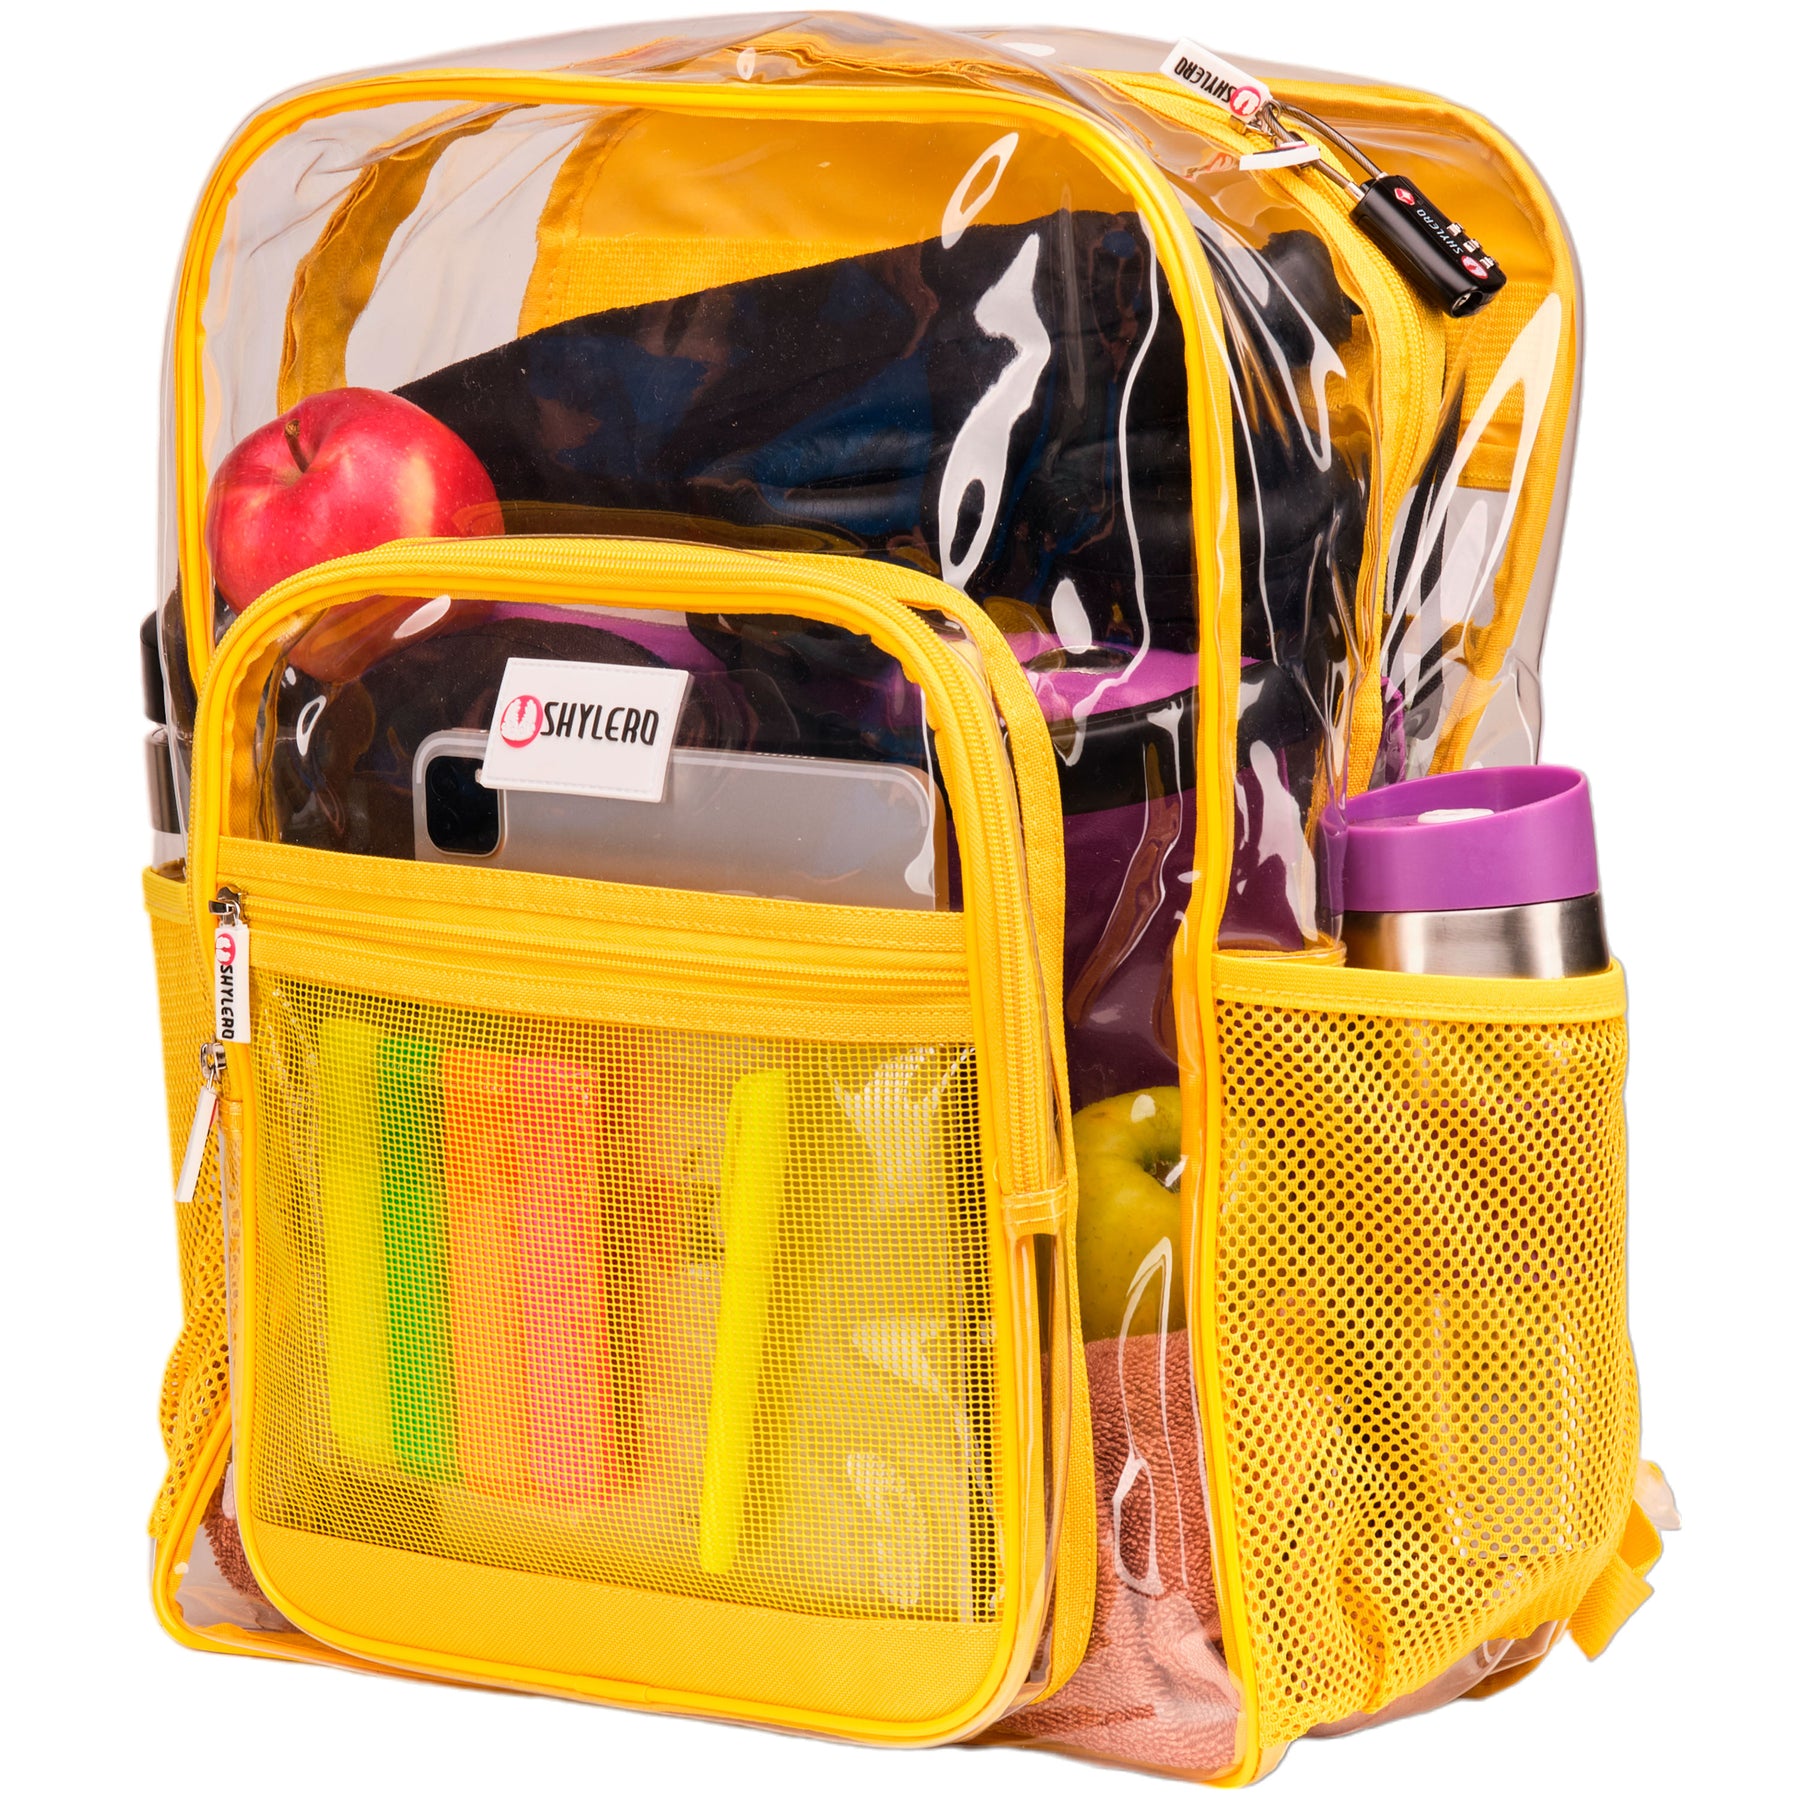 Clear Backpack For Work and School Backpack XL | TSA Lock | H18" x W14" x D8" (45cm x 35cm x 20cm) | 31.5 L | Yellow Rhino